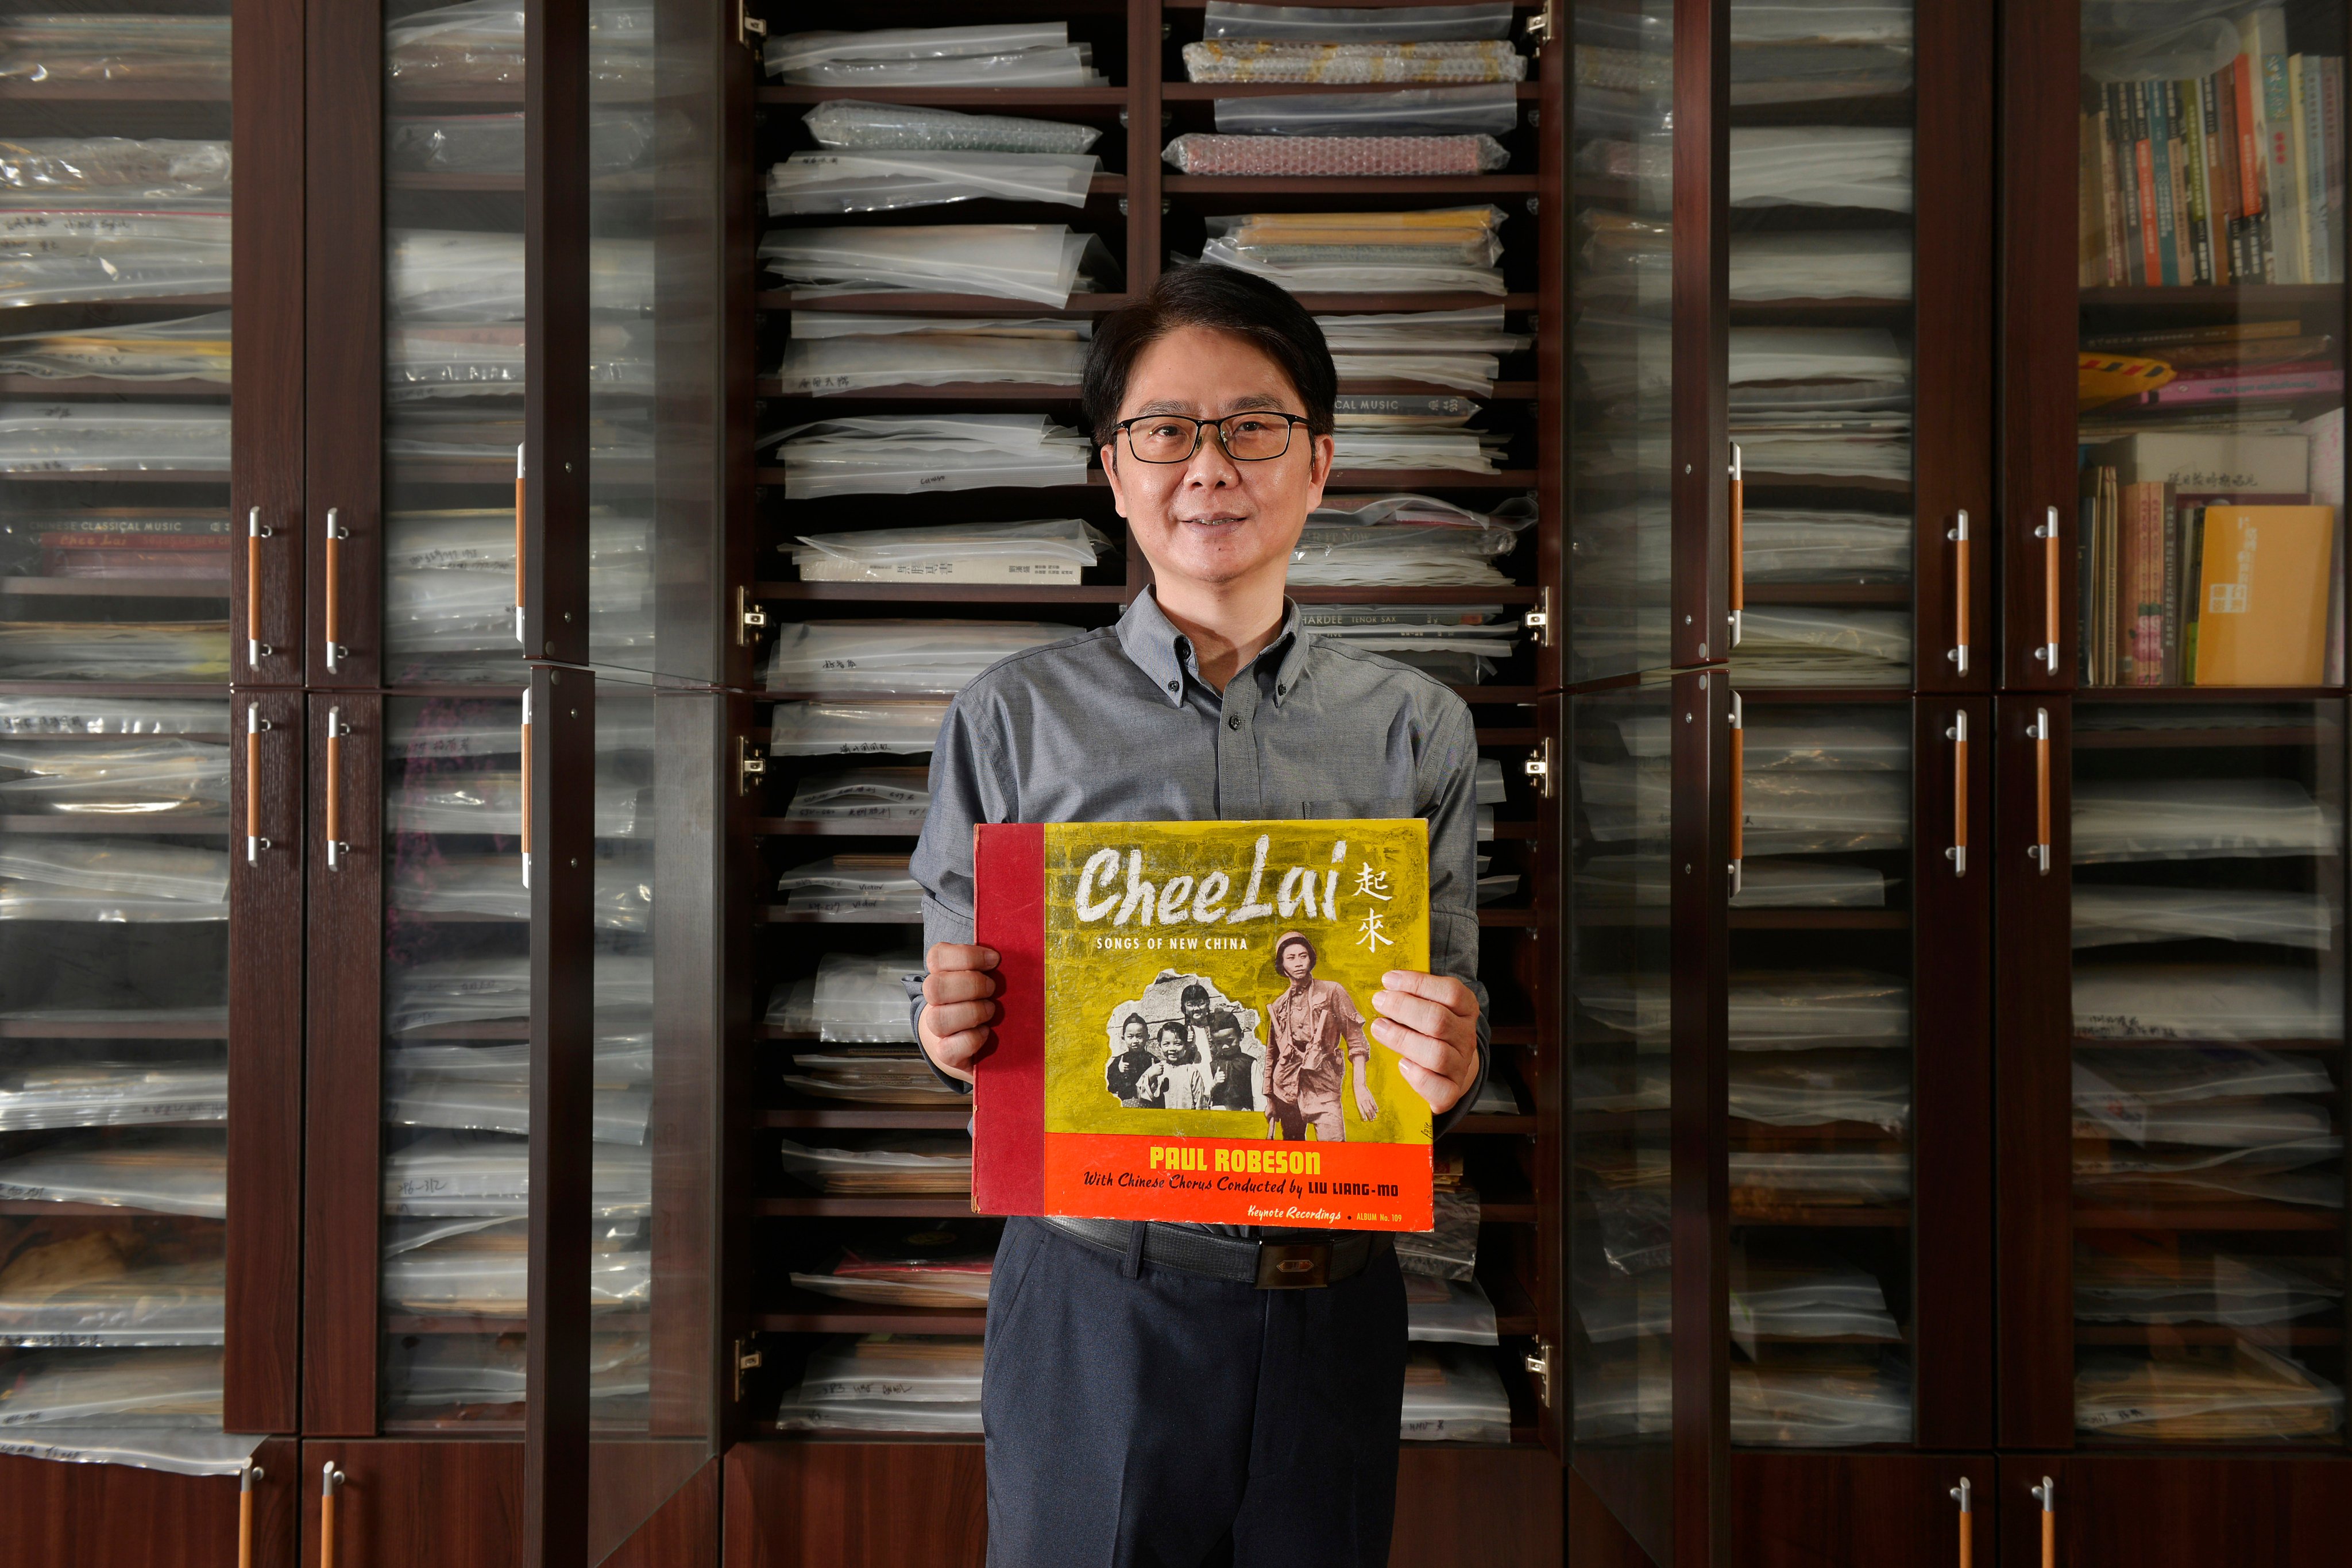 Hsu Deng-fang holds one of his rare records, with a small part of his collection stacked behind him. Photo: Chris Stowers/Panos